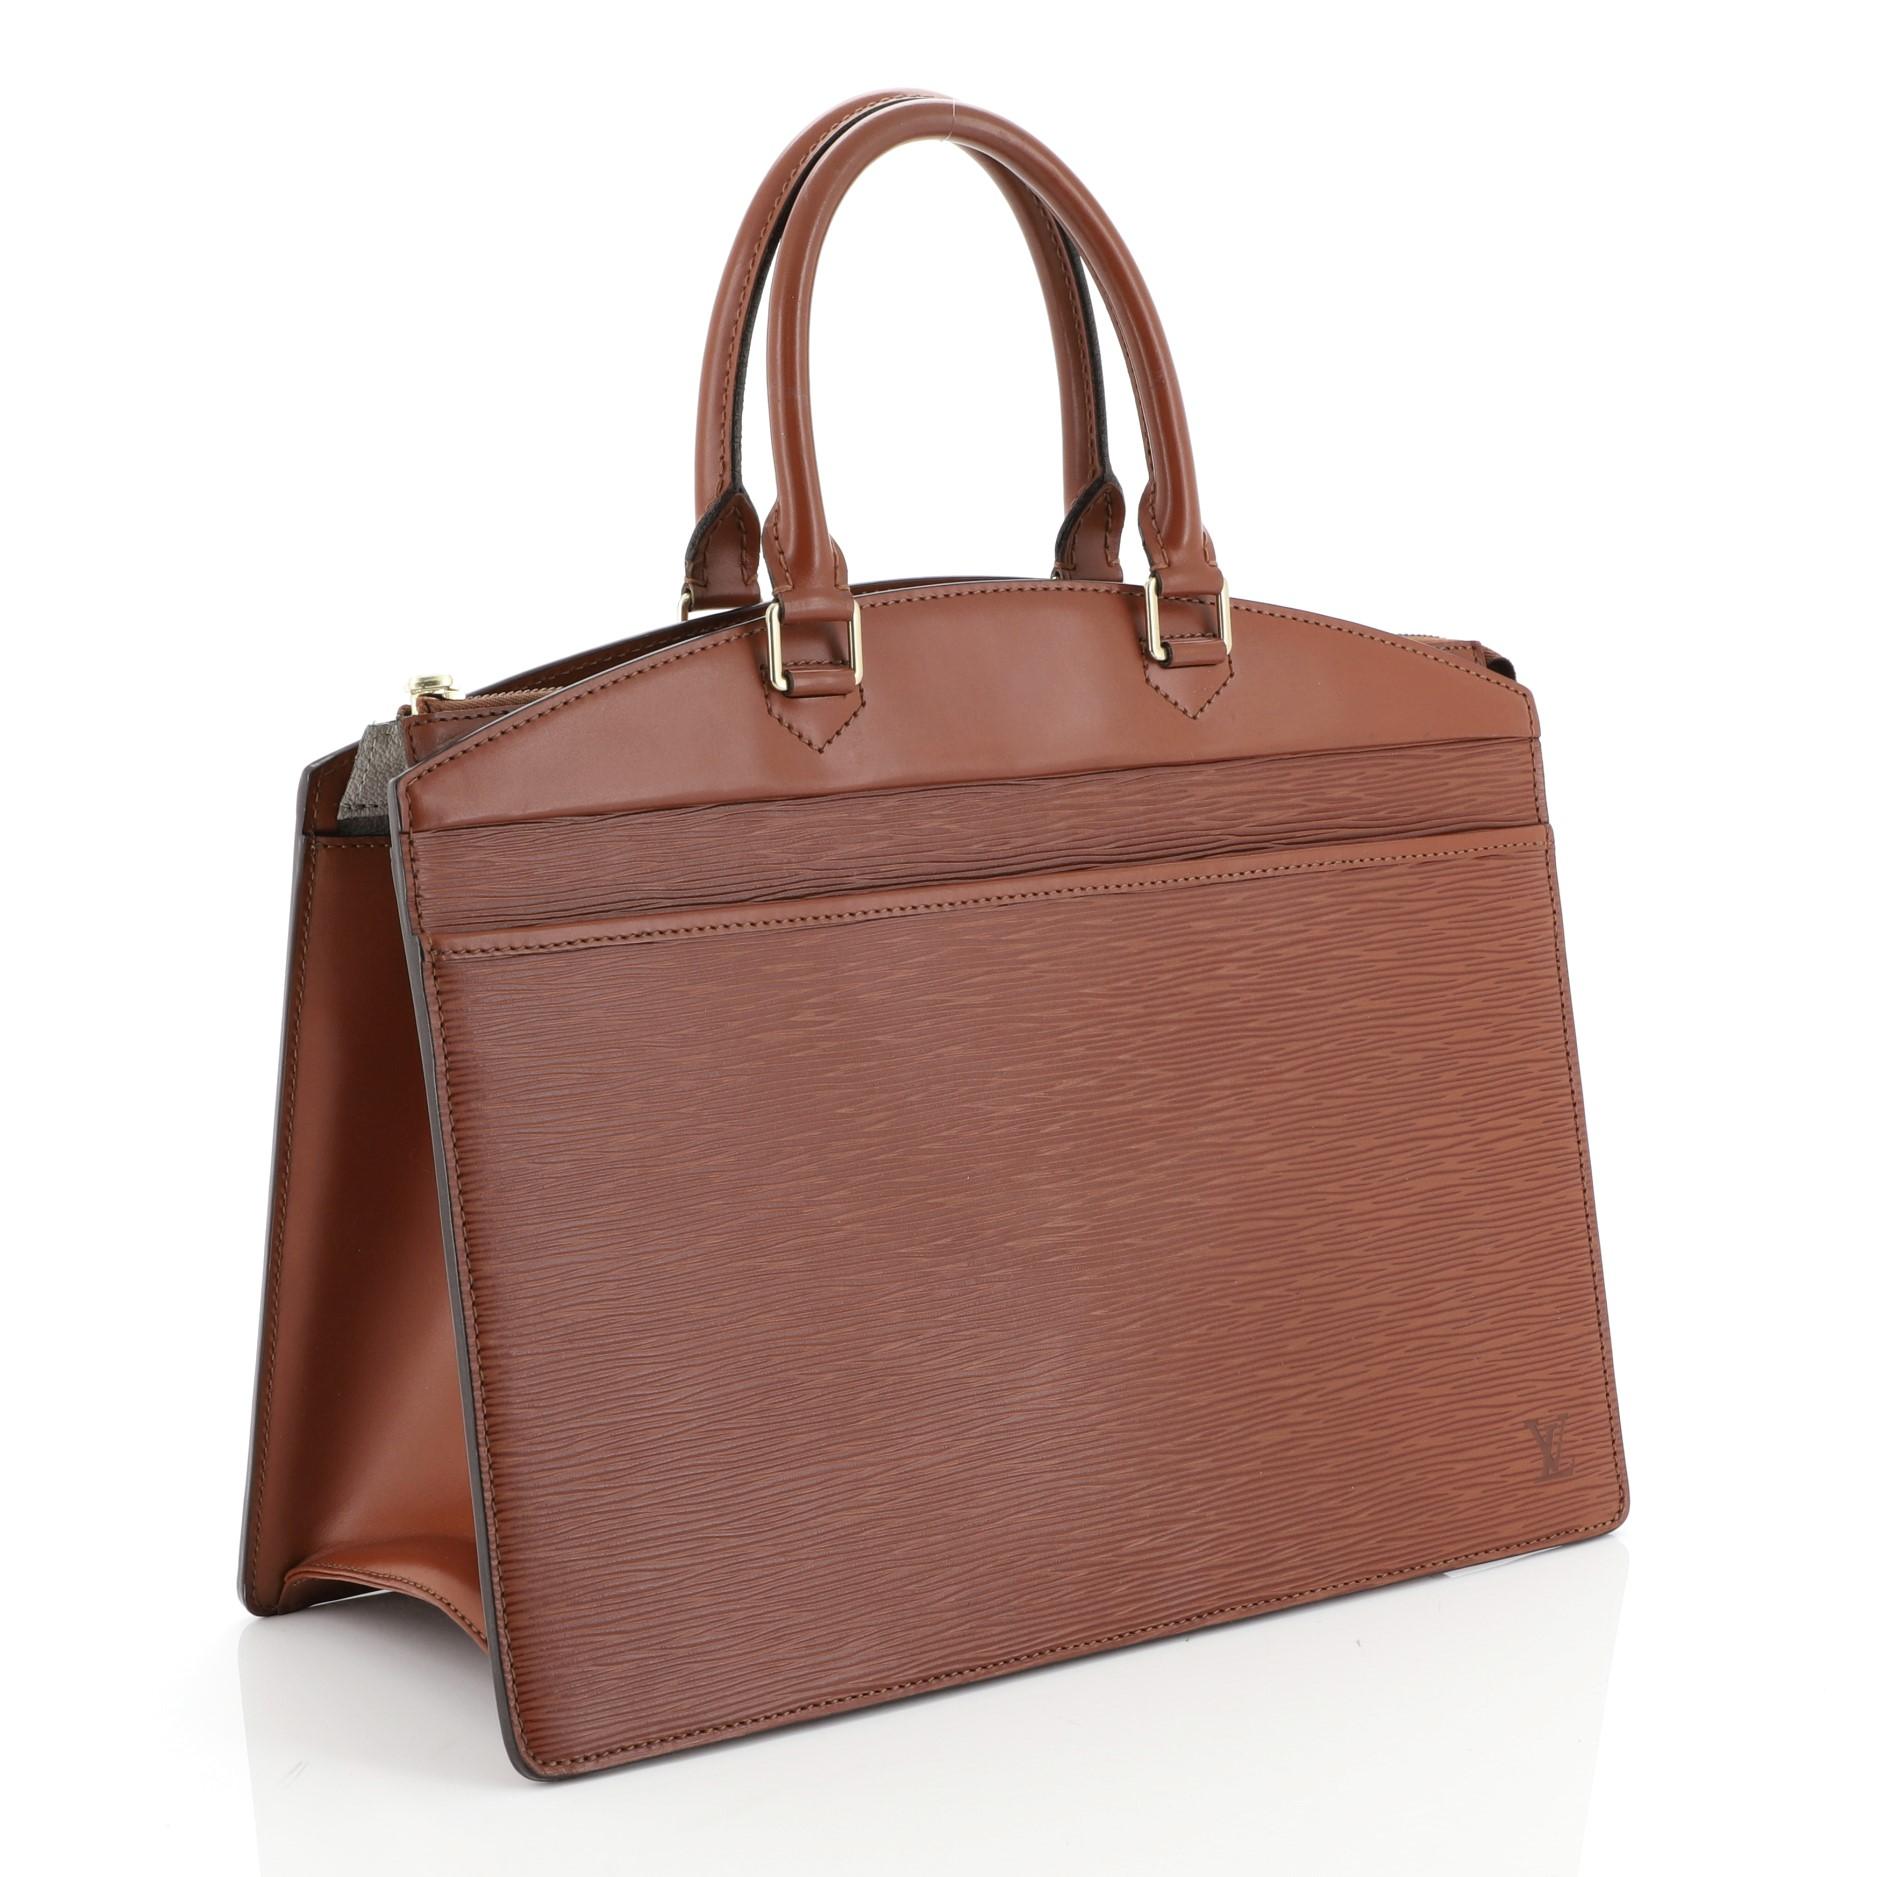 This Louis Vuitton Riviera Handbag Epi Leather, crafted from brown epi leather, features dual rolled leather handles, full-length exterior front pocket, subtle LV monogram side logo, and gold-tone hardware. Its top zip closure opens to a brown